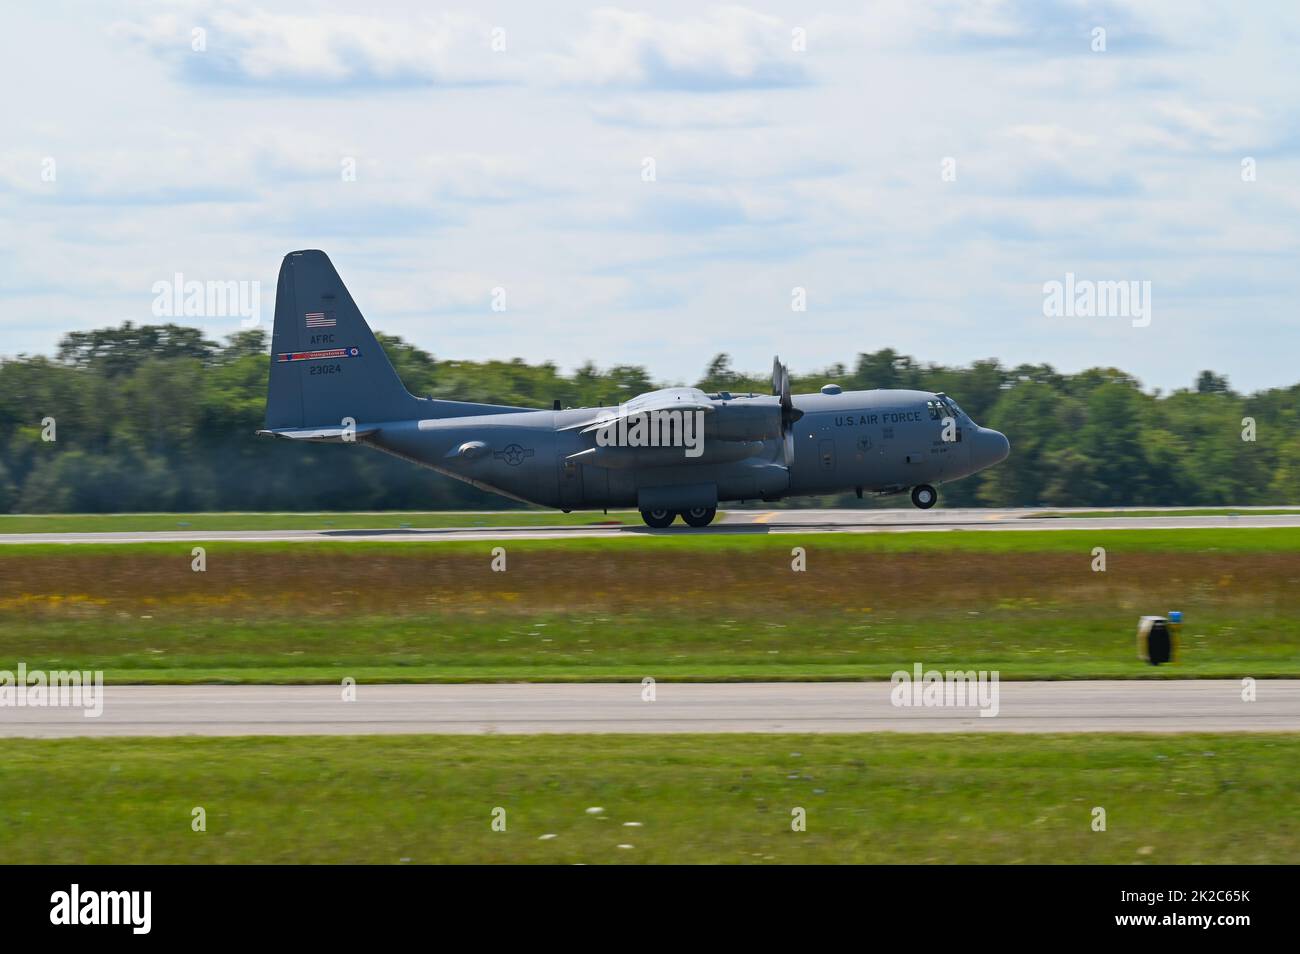 A C-130H Hercules aircraft assigned to the 910th Airlift Wing takes off from Youngstown Air Reserve Station, Ohio, Sept. 15, 2022. The formation flight was part of the 757th Airlift Squadron's annual TAC week, a condensed week of flight training highlighted by a six-aircraft formation flight. (U.S. Air Force photo by Eric M. White) Stock Photo